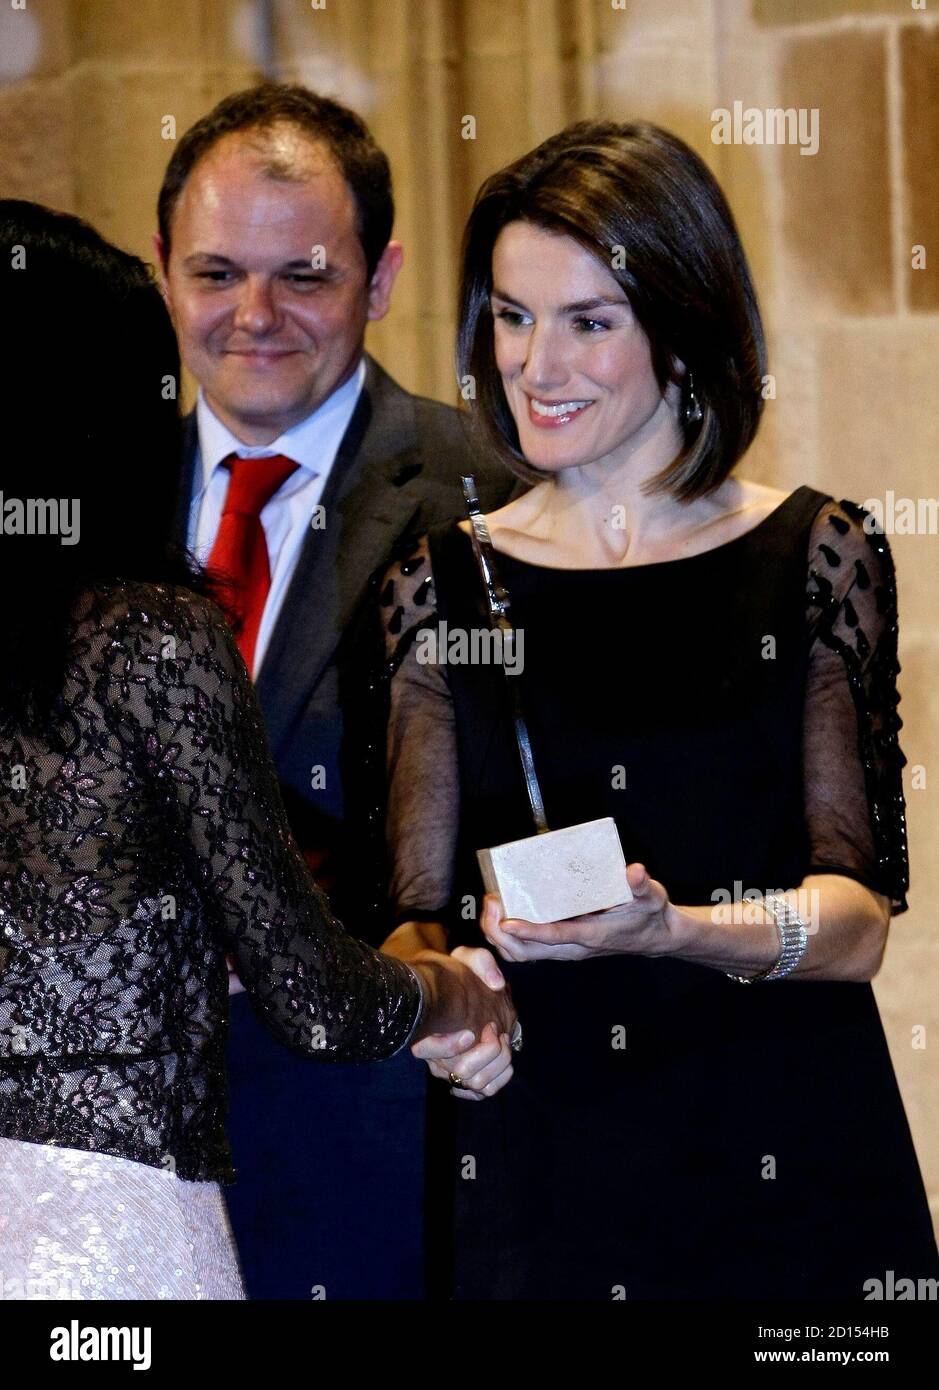 Spain's Princess Letizia presents an award to Montse Nzang (L) for her company's creation of micro credit, at the FIDEM awards for enterprising women, at Casa Llotja de Mar in Barcelona March 26, 2008.     REUTERS/Gustau Nacarino  (SPAIN) Stock Photo